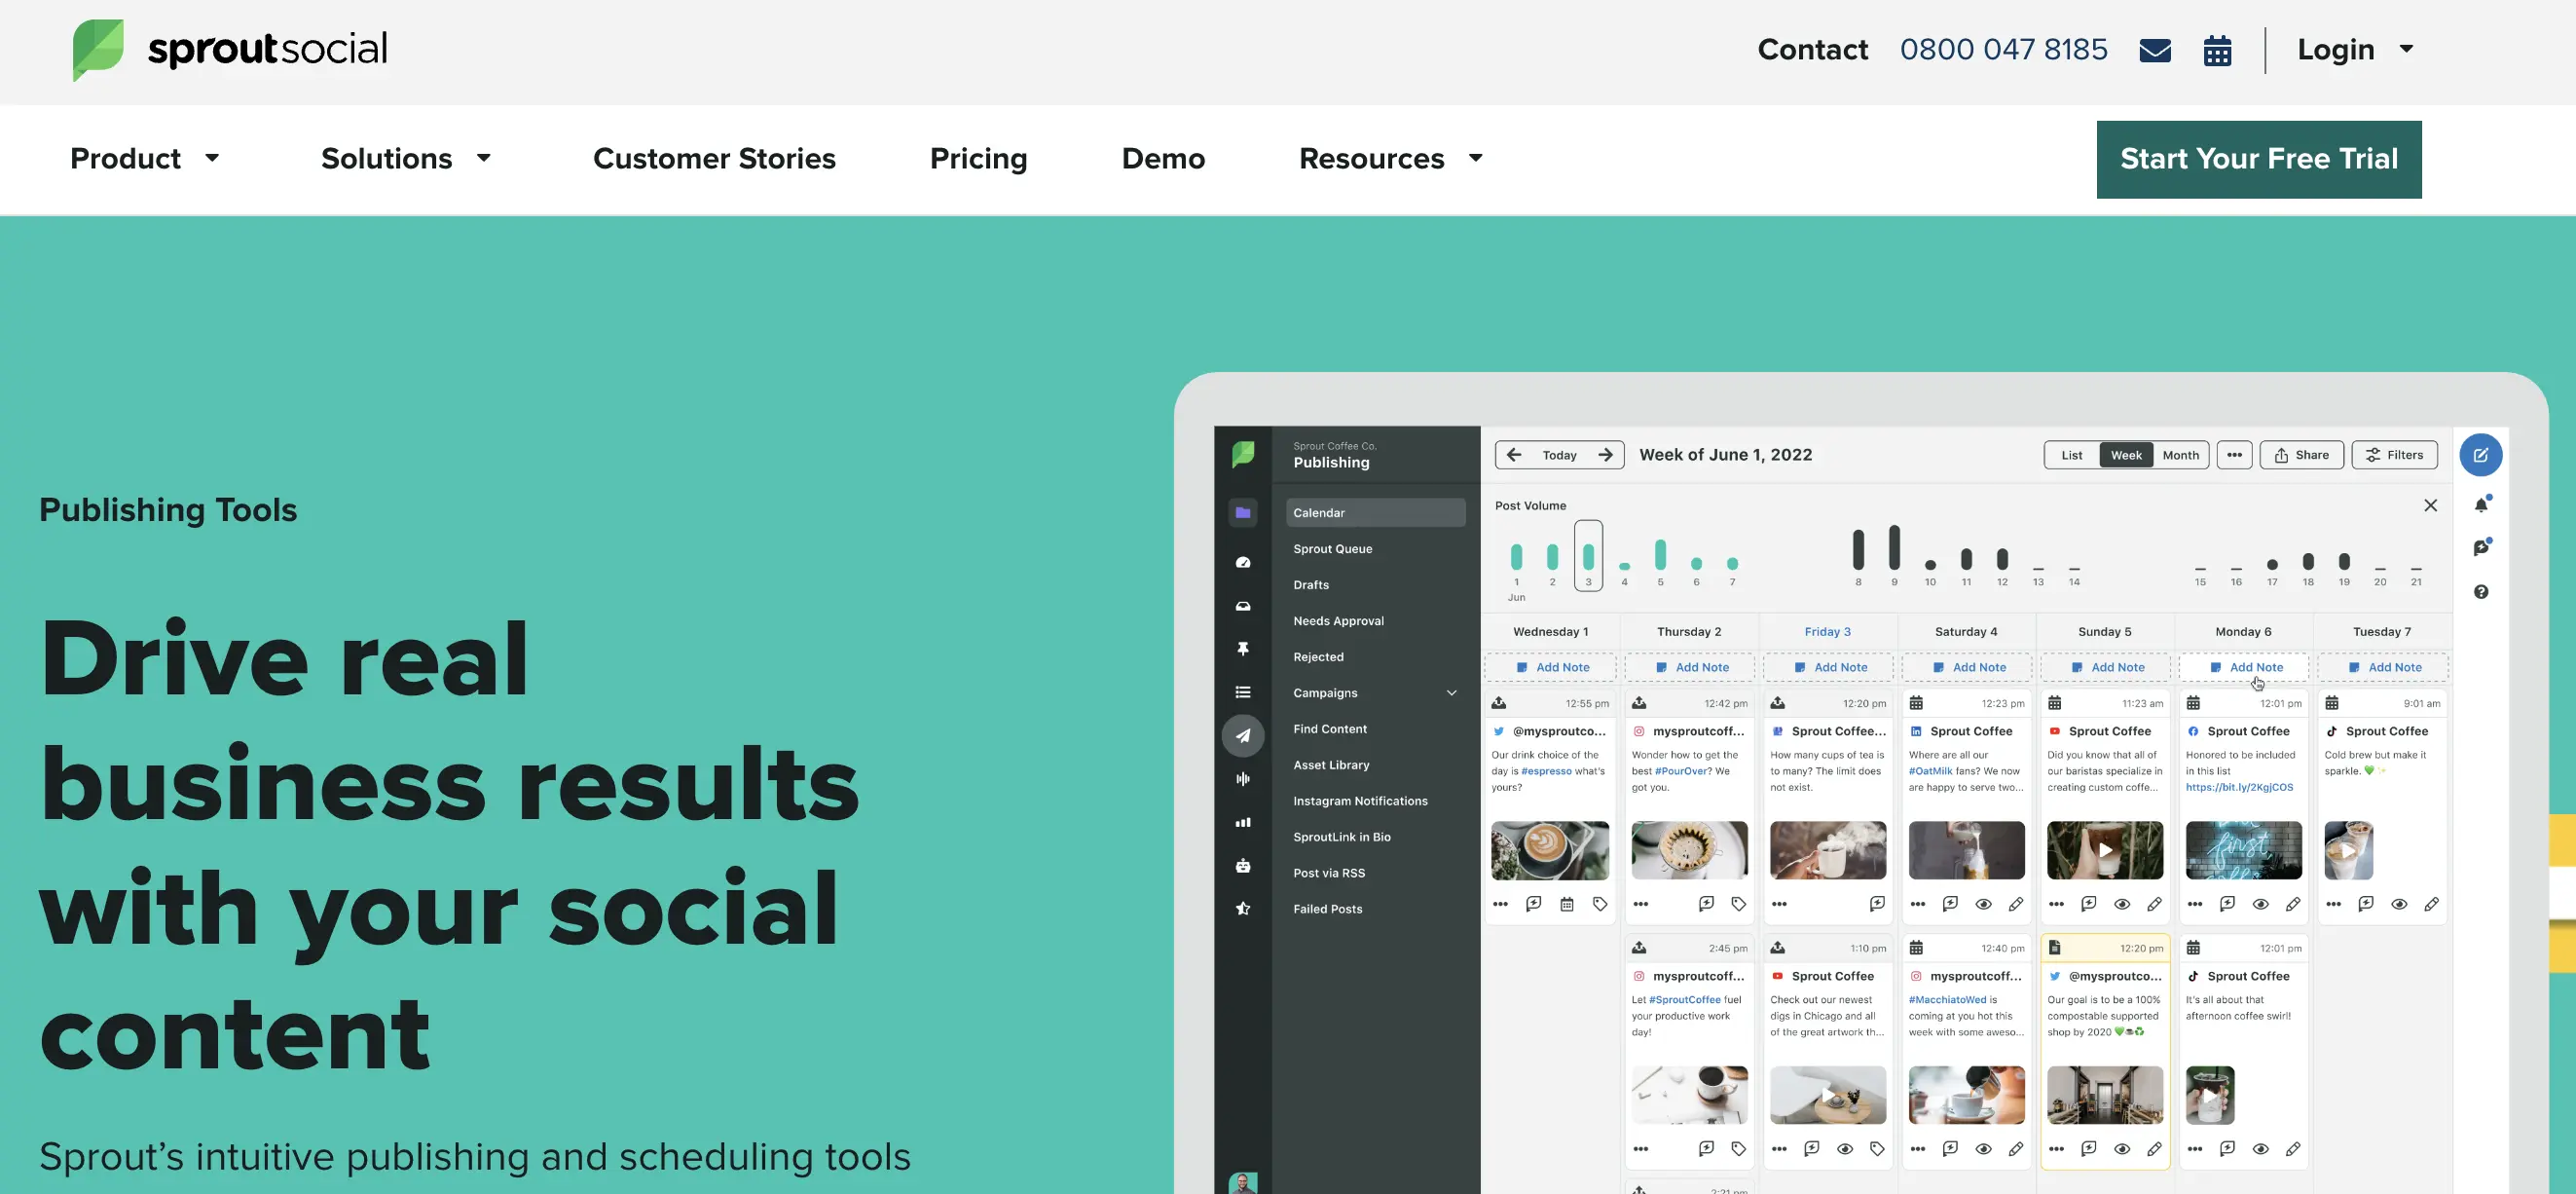 sprout social scheduling